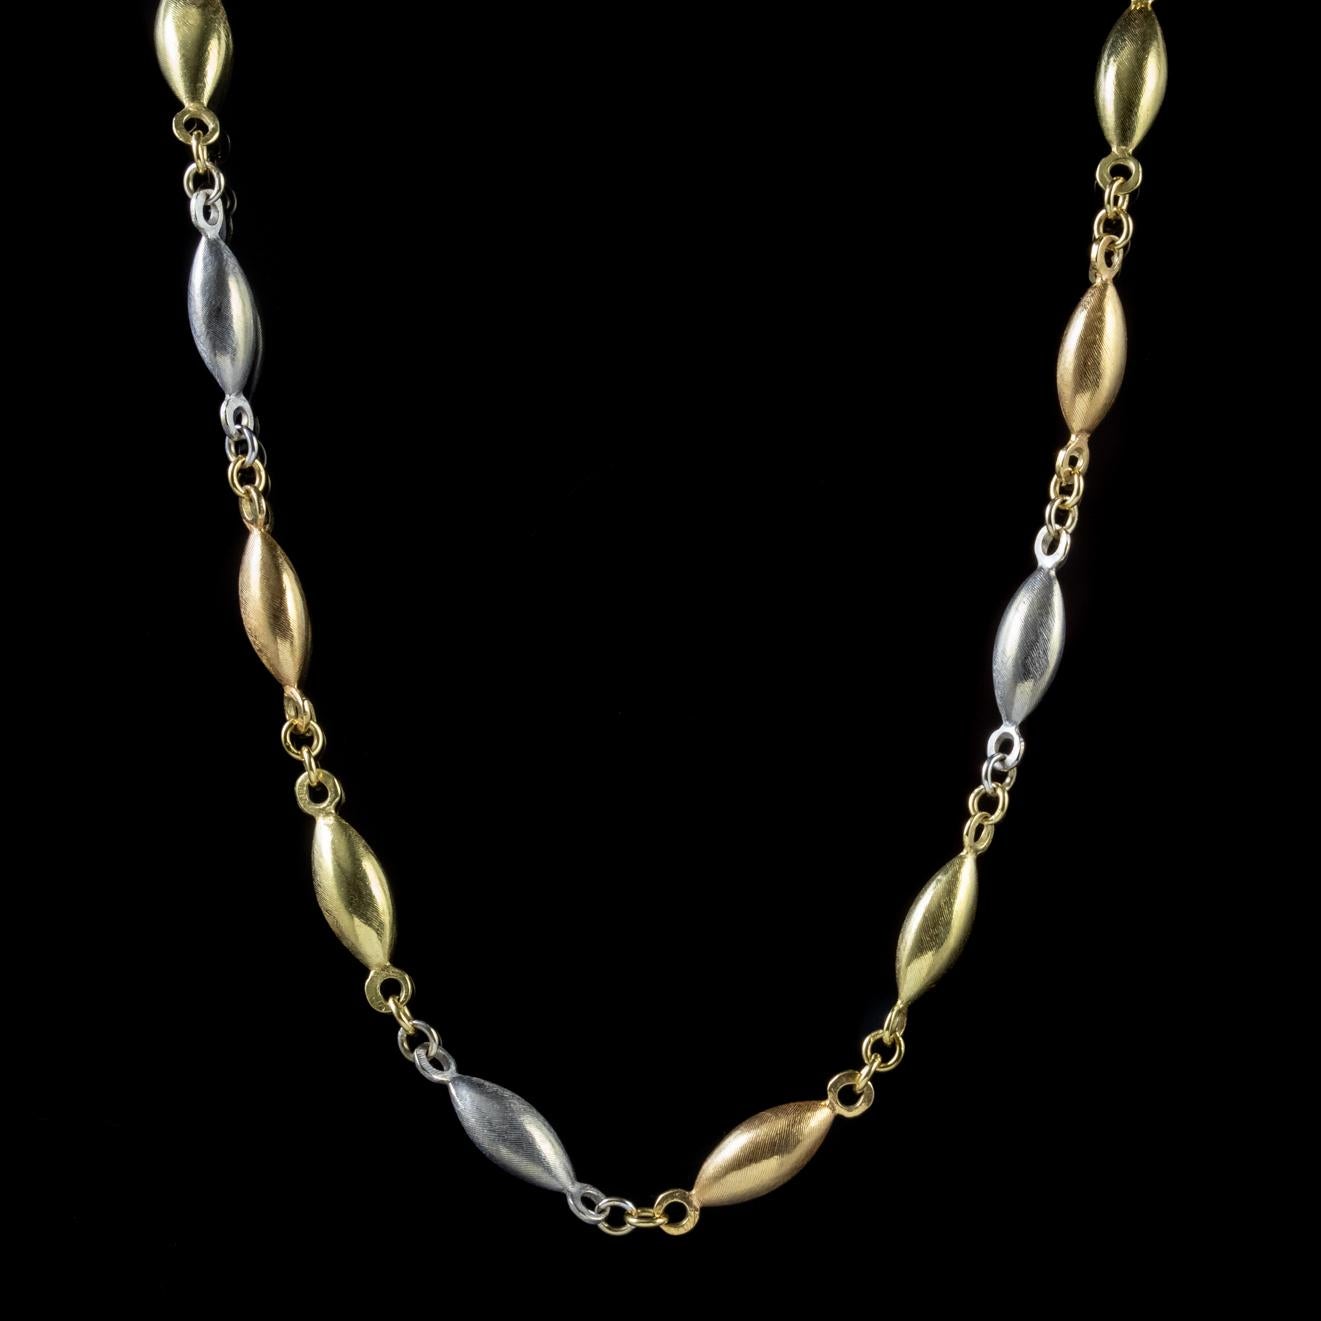 This wonderful, long antique chain has been beautifully preserved from the Edwardian era and is made up of fancy interchanging 18ct Yellow Gold and Platinum links.

Each link has a lovely smooth surface with lots of shine and fine engraved stripes.